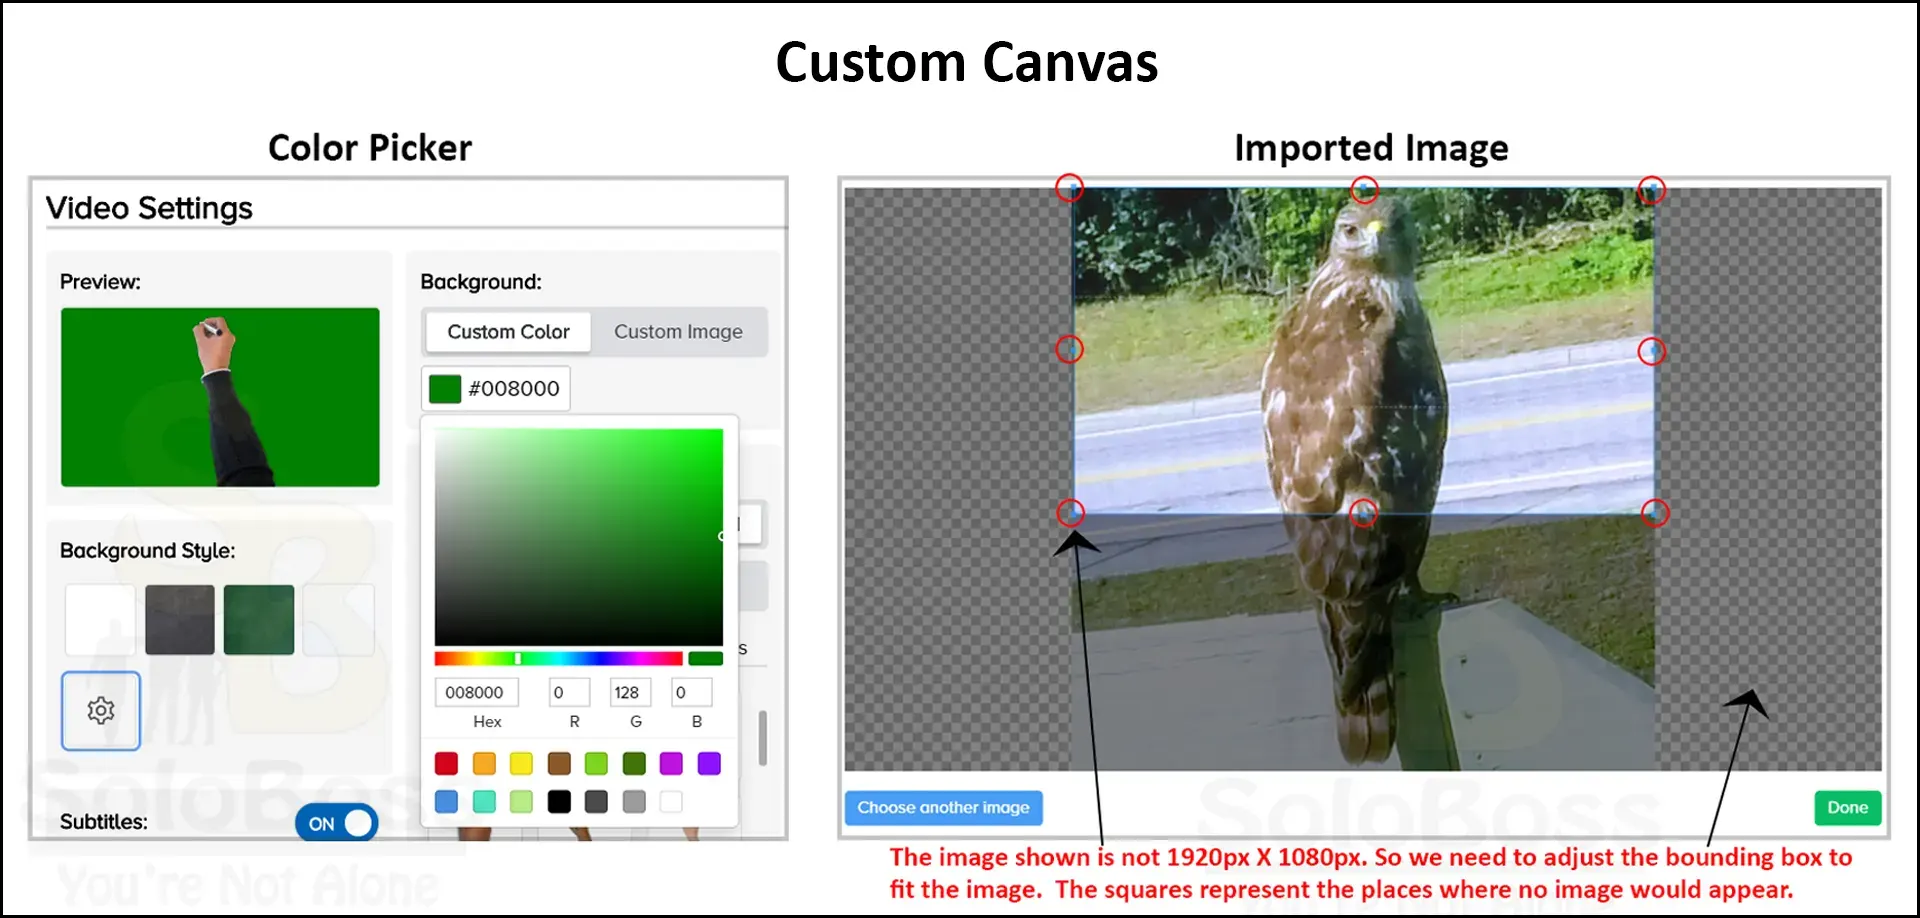 Shows image controls about using the custom canvas in Doodly.